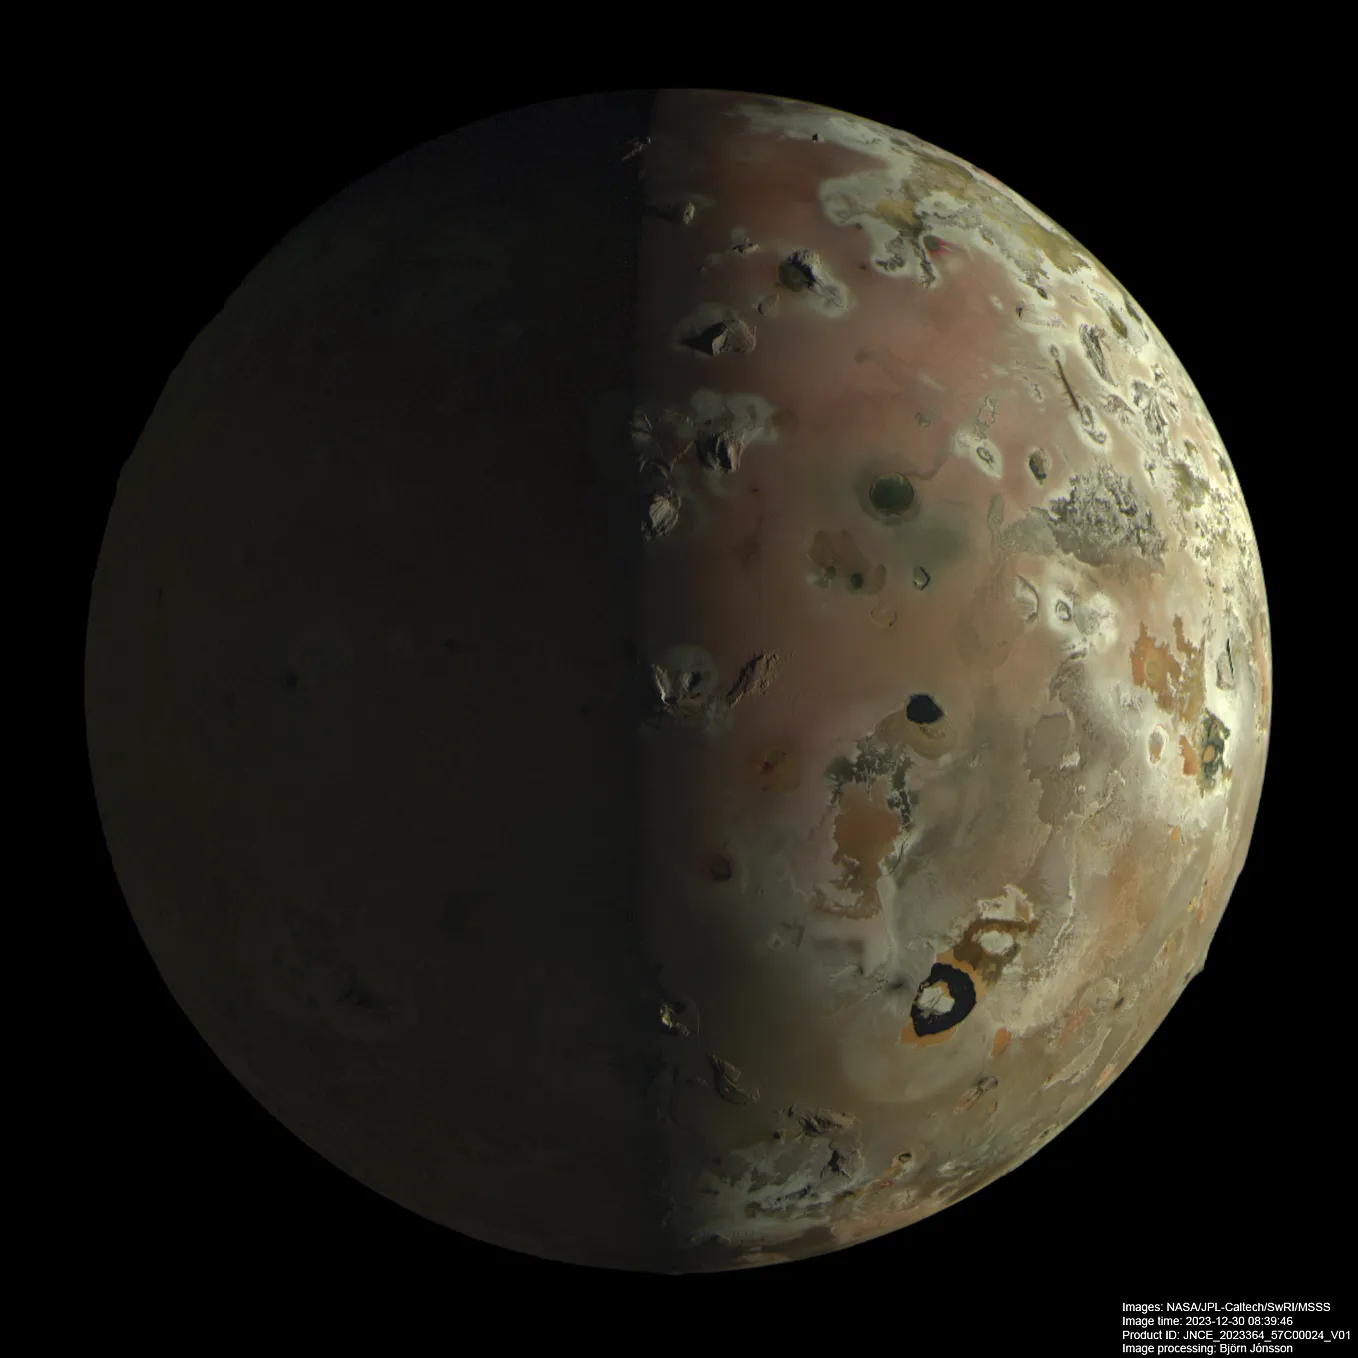 See Io, our most volcanic moon, erupt like never before